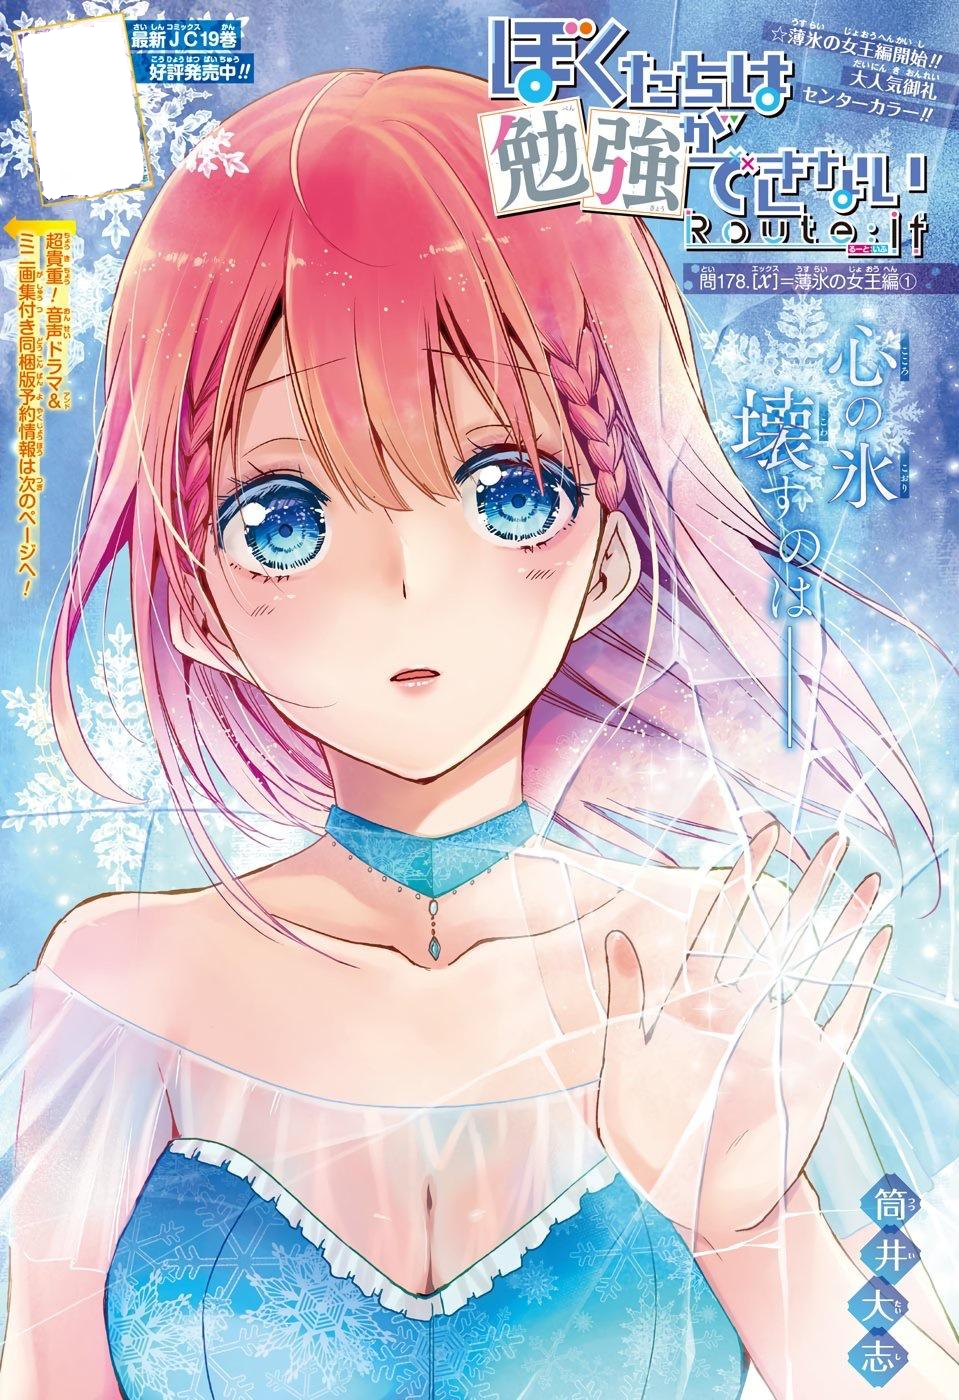 The Queen of Thin Ice Arc, We Never Learn Wiki